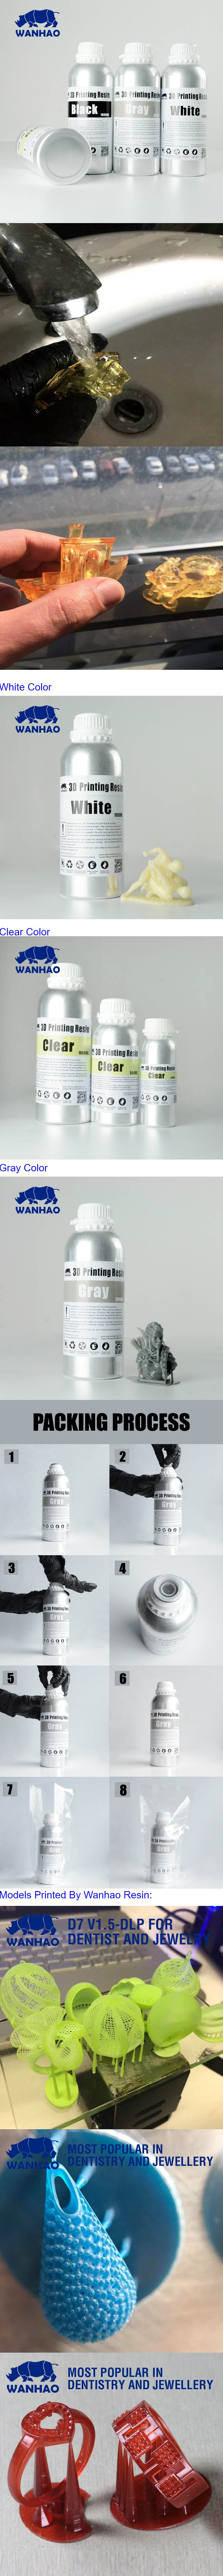 Wanhao Water Washable 3D Printing Resin